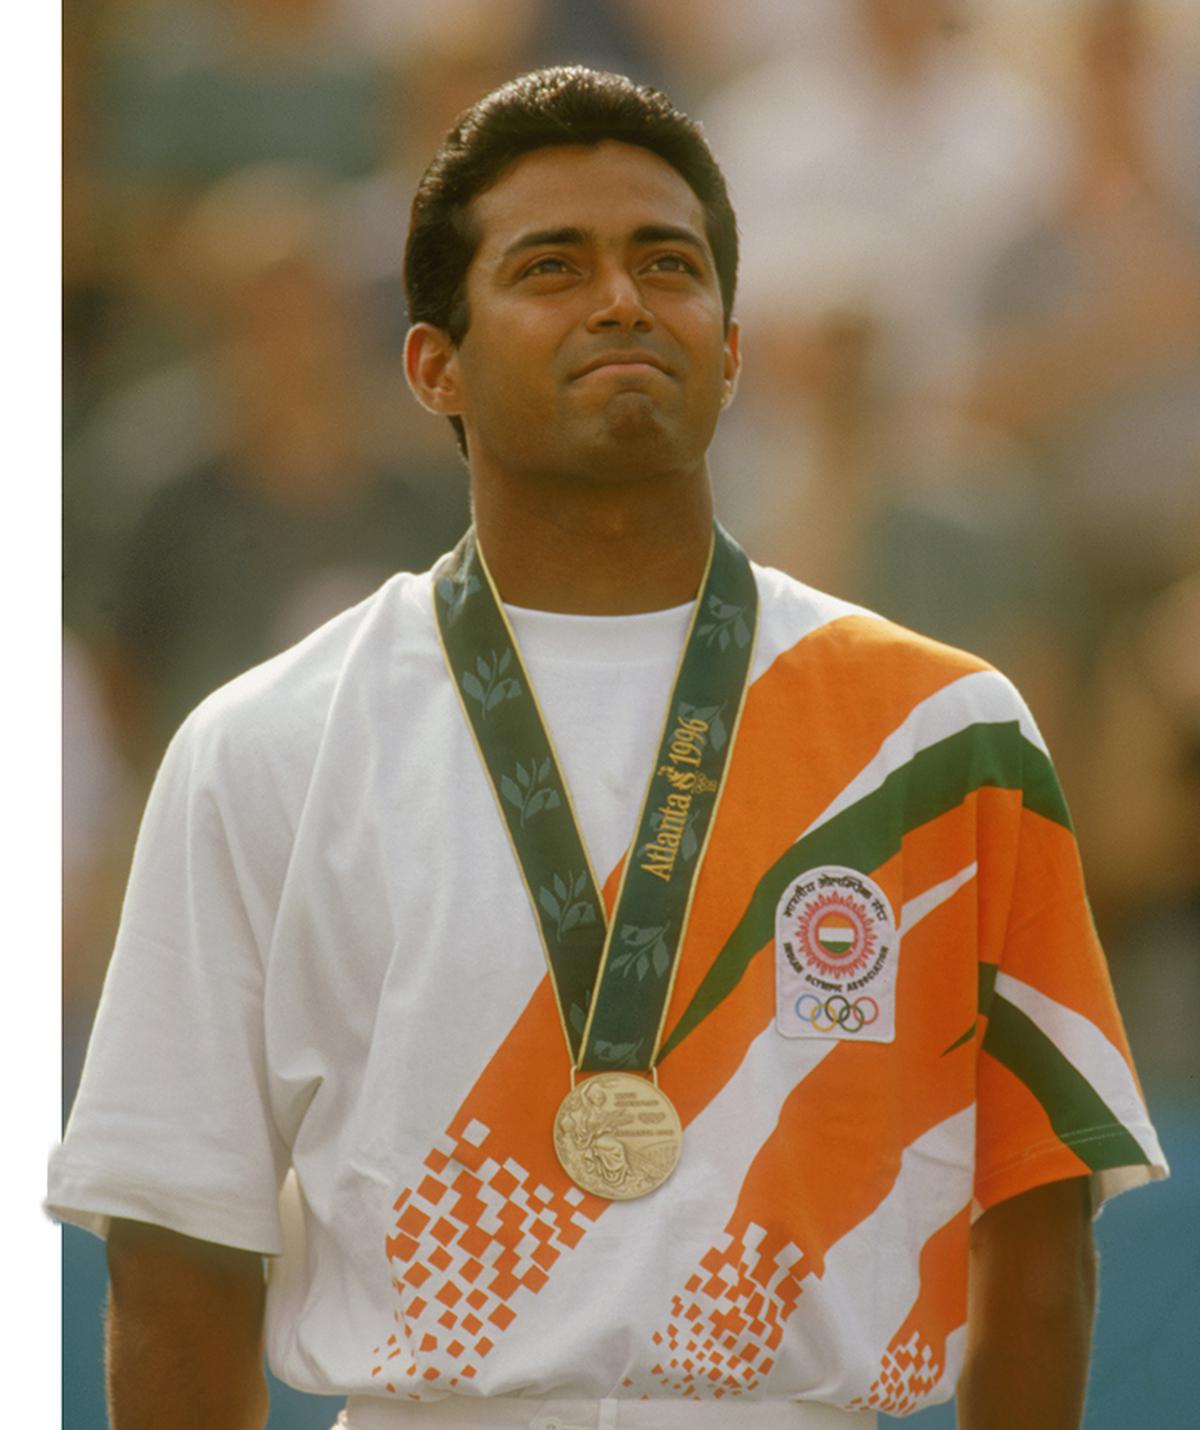 Leander Paes stands on the podium after winning a bronze medal in the men’s singles tennis event at the 1996 Summer Olympic Games in Atlanta.